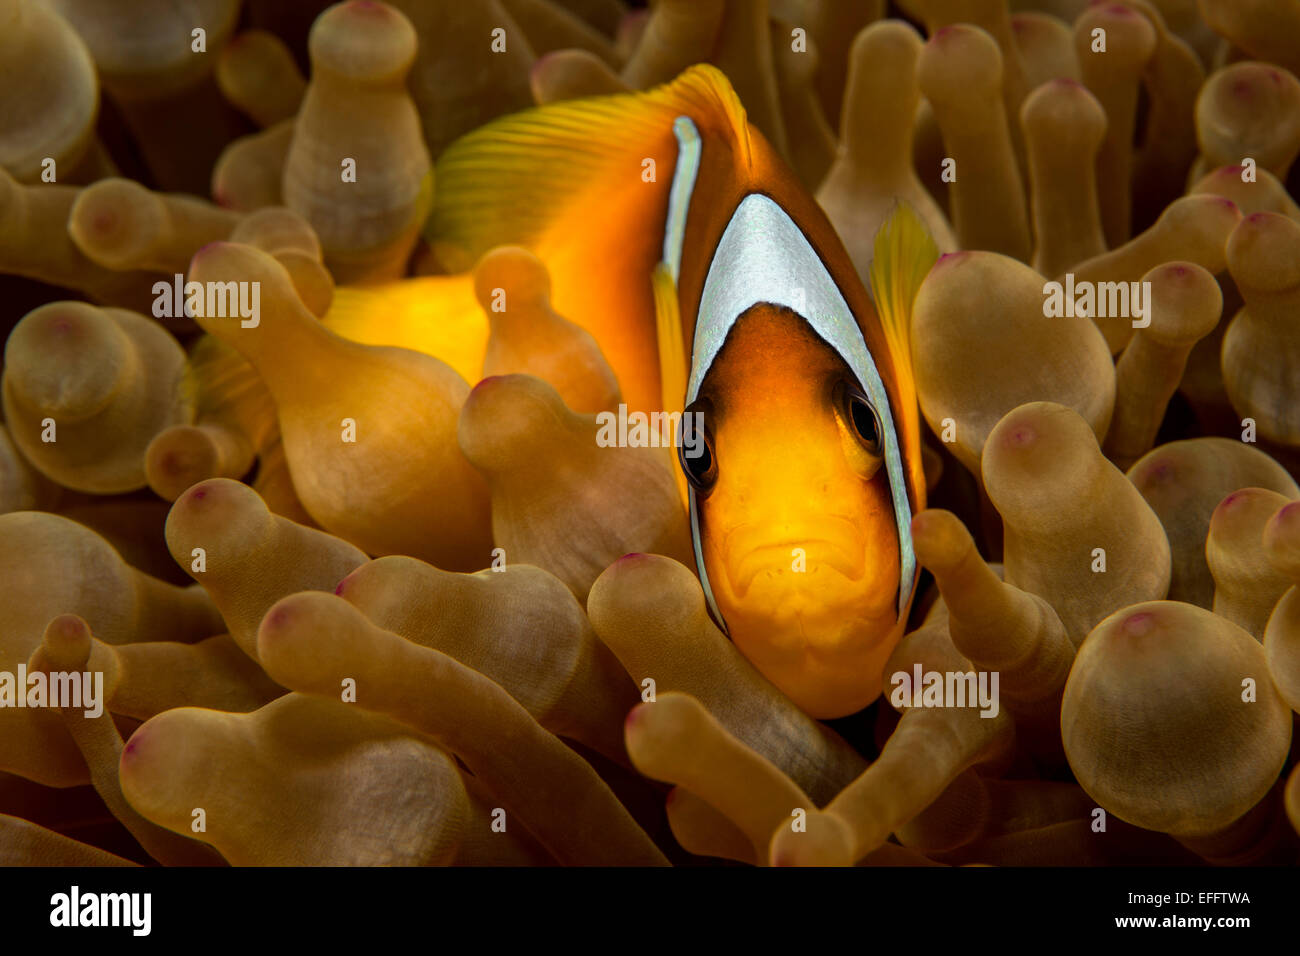 Egypt, Red Sea, Red Sea anemonefish, Amphiprion bicinctus, between coral Stock Photo